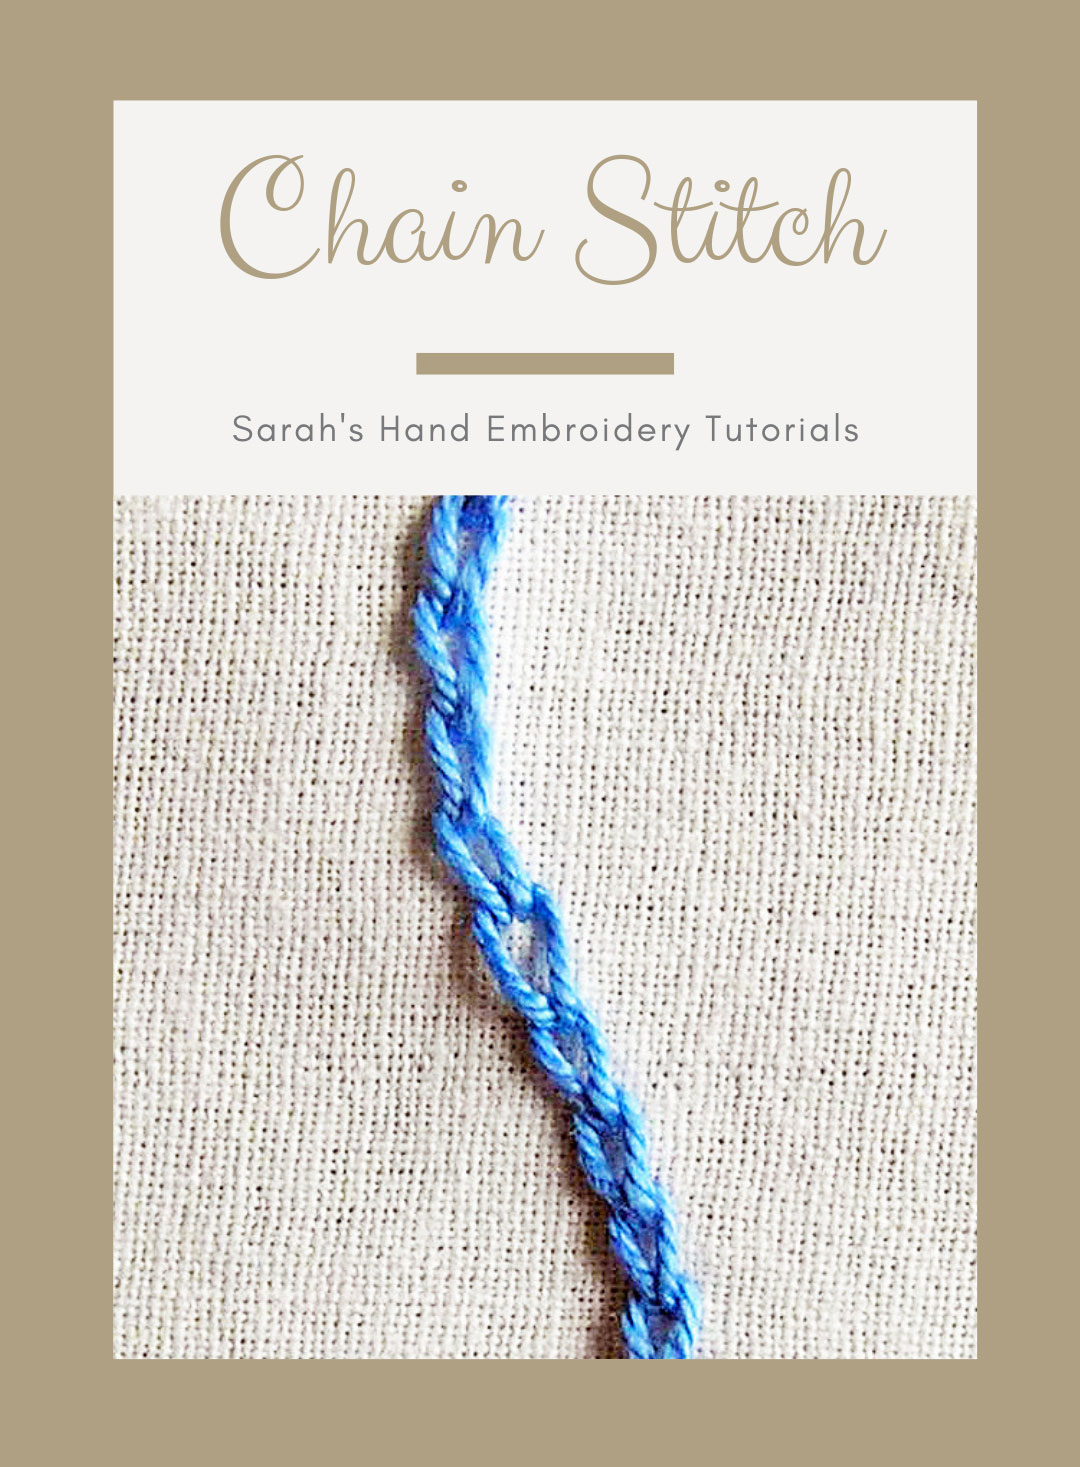 Learn Embroidery With 32 Helpful Stitch Instructions